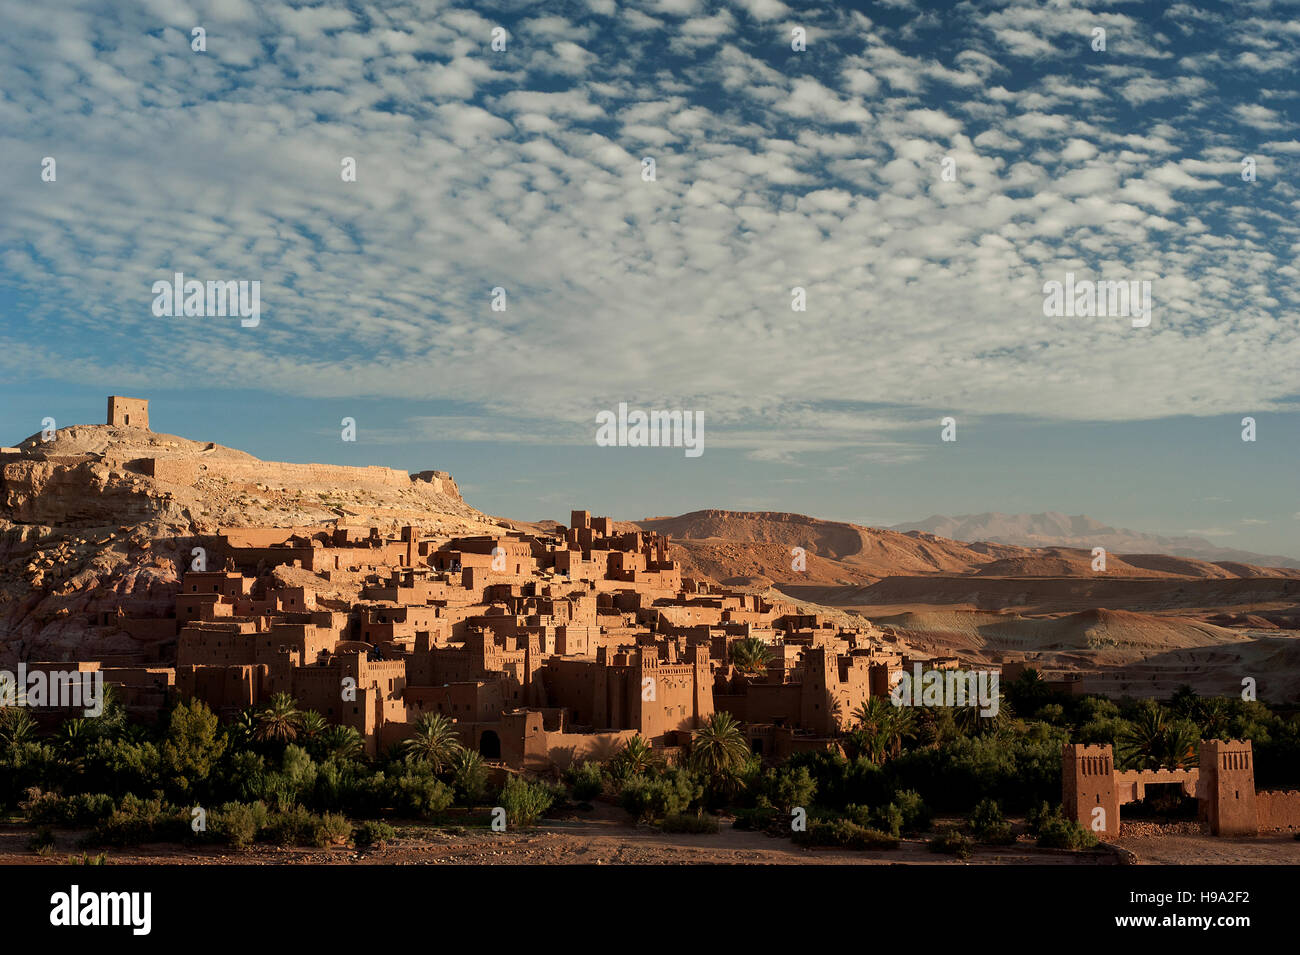 Ait Benhaddou, Morocco: the fortified town or ksar, a world heritage site, lit up at sunrise in Morocco's arid Atlas Mountains. Stock Photo